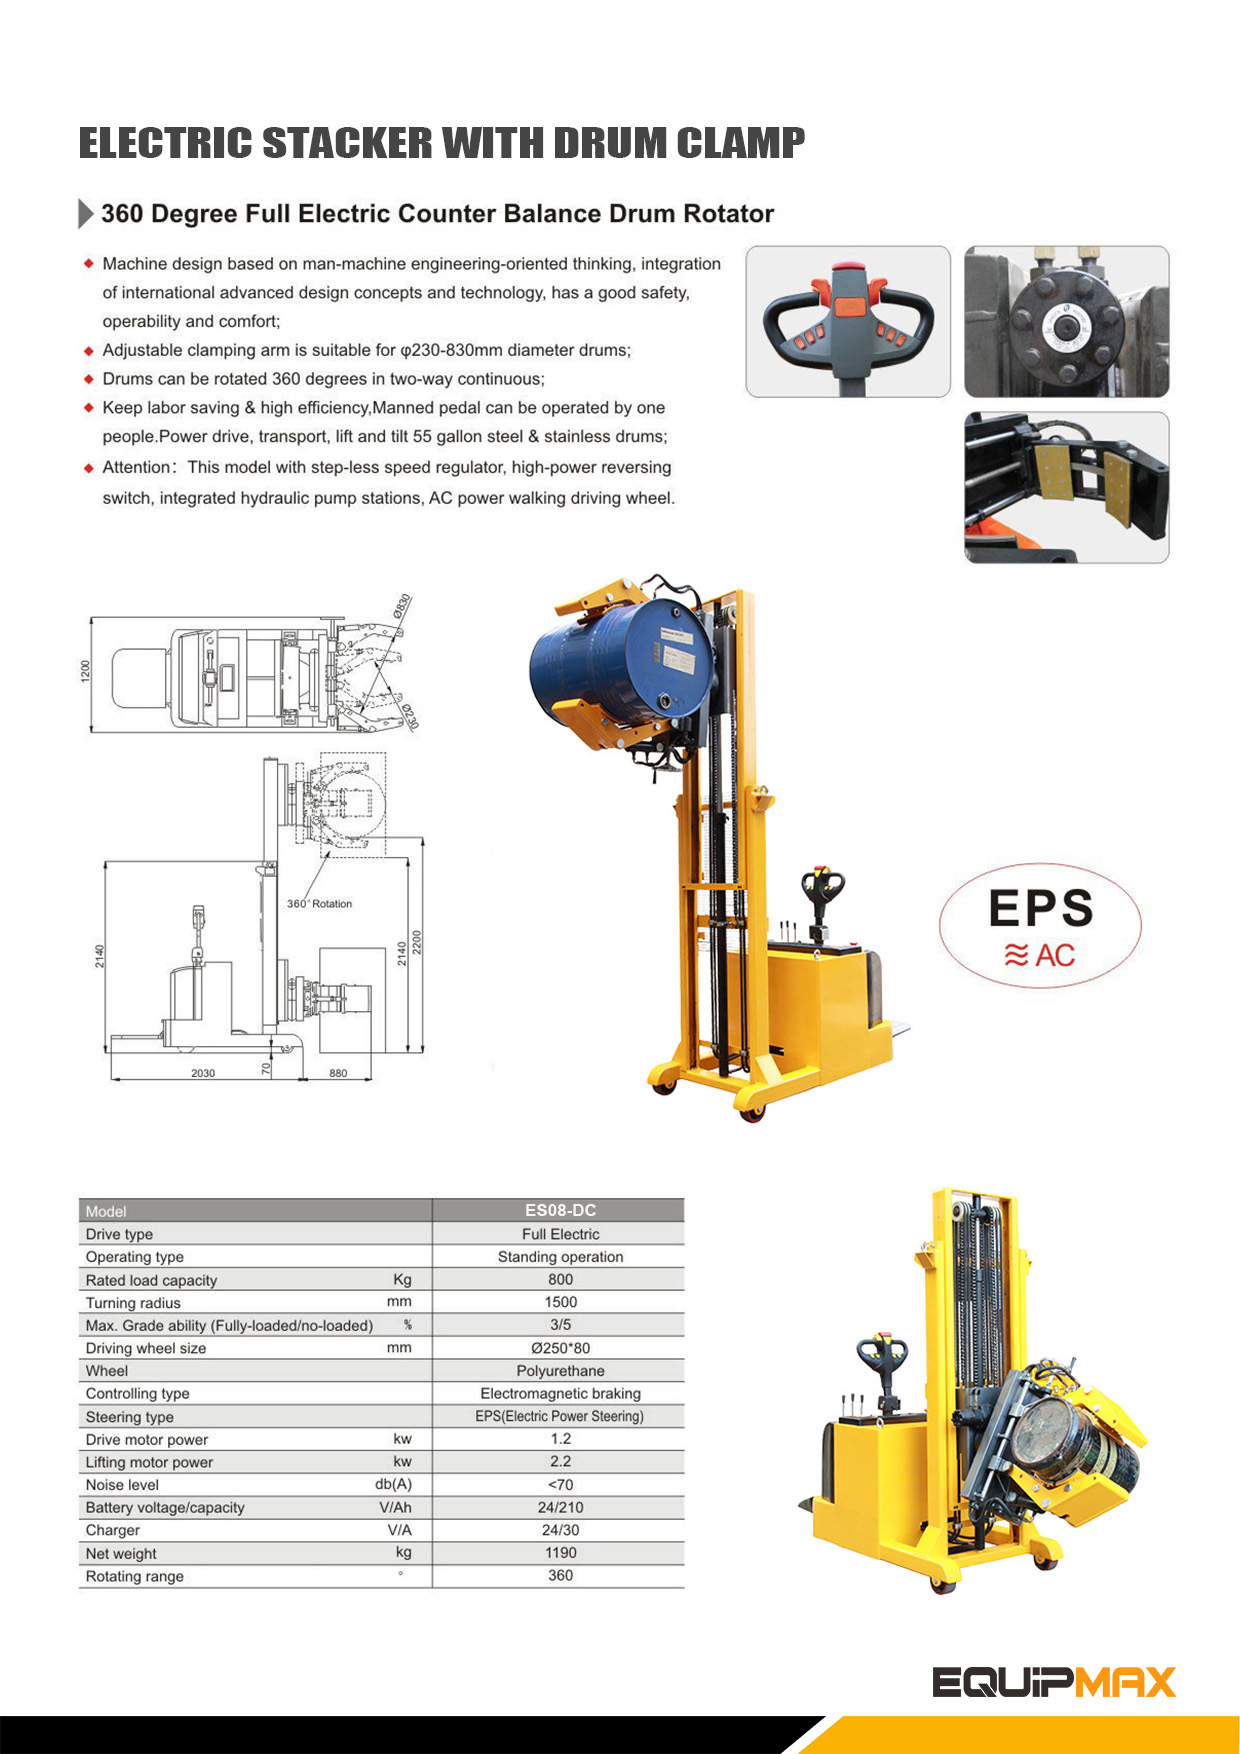 Brochure-ElectricStackerwithDrumClampES08-DC